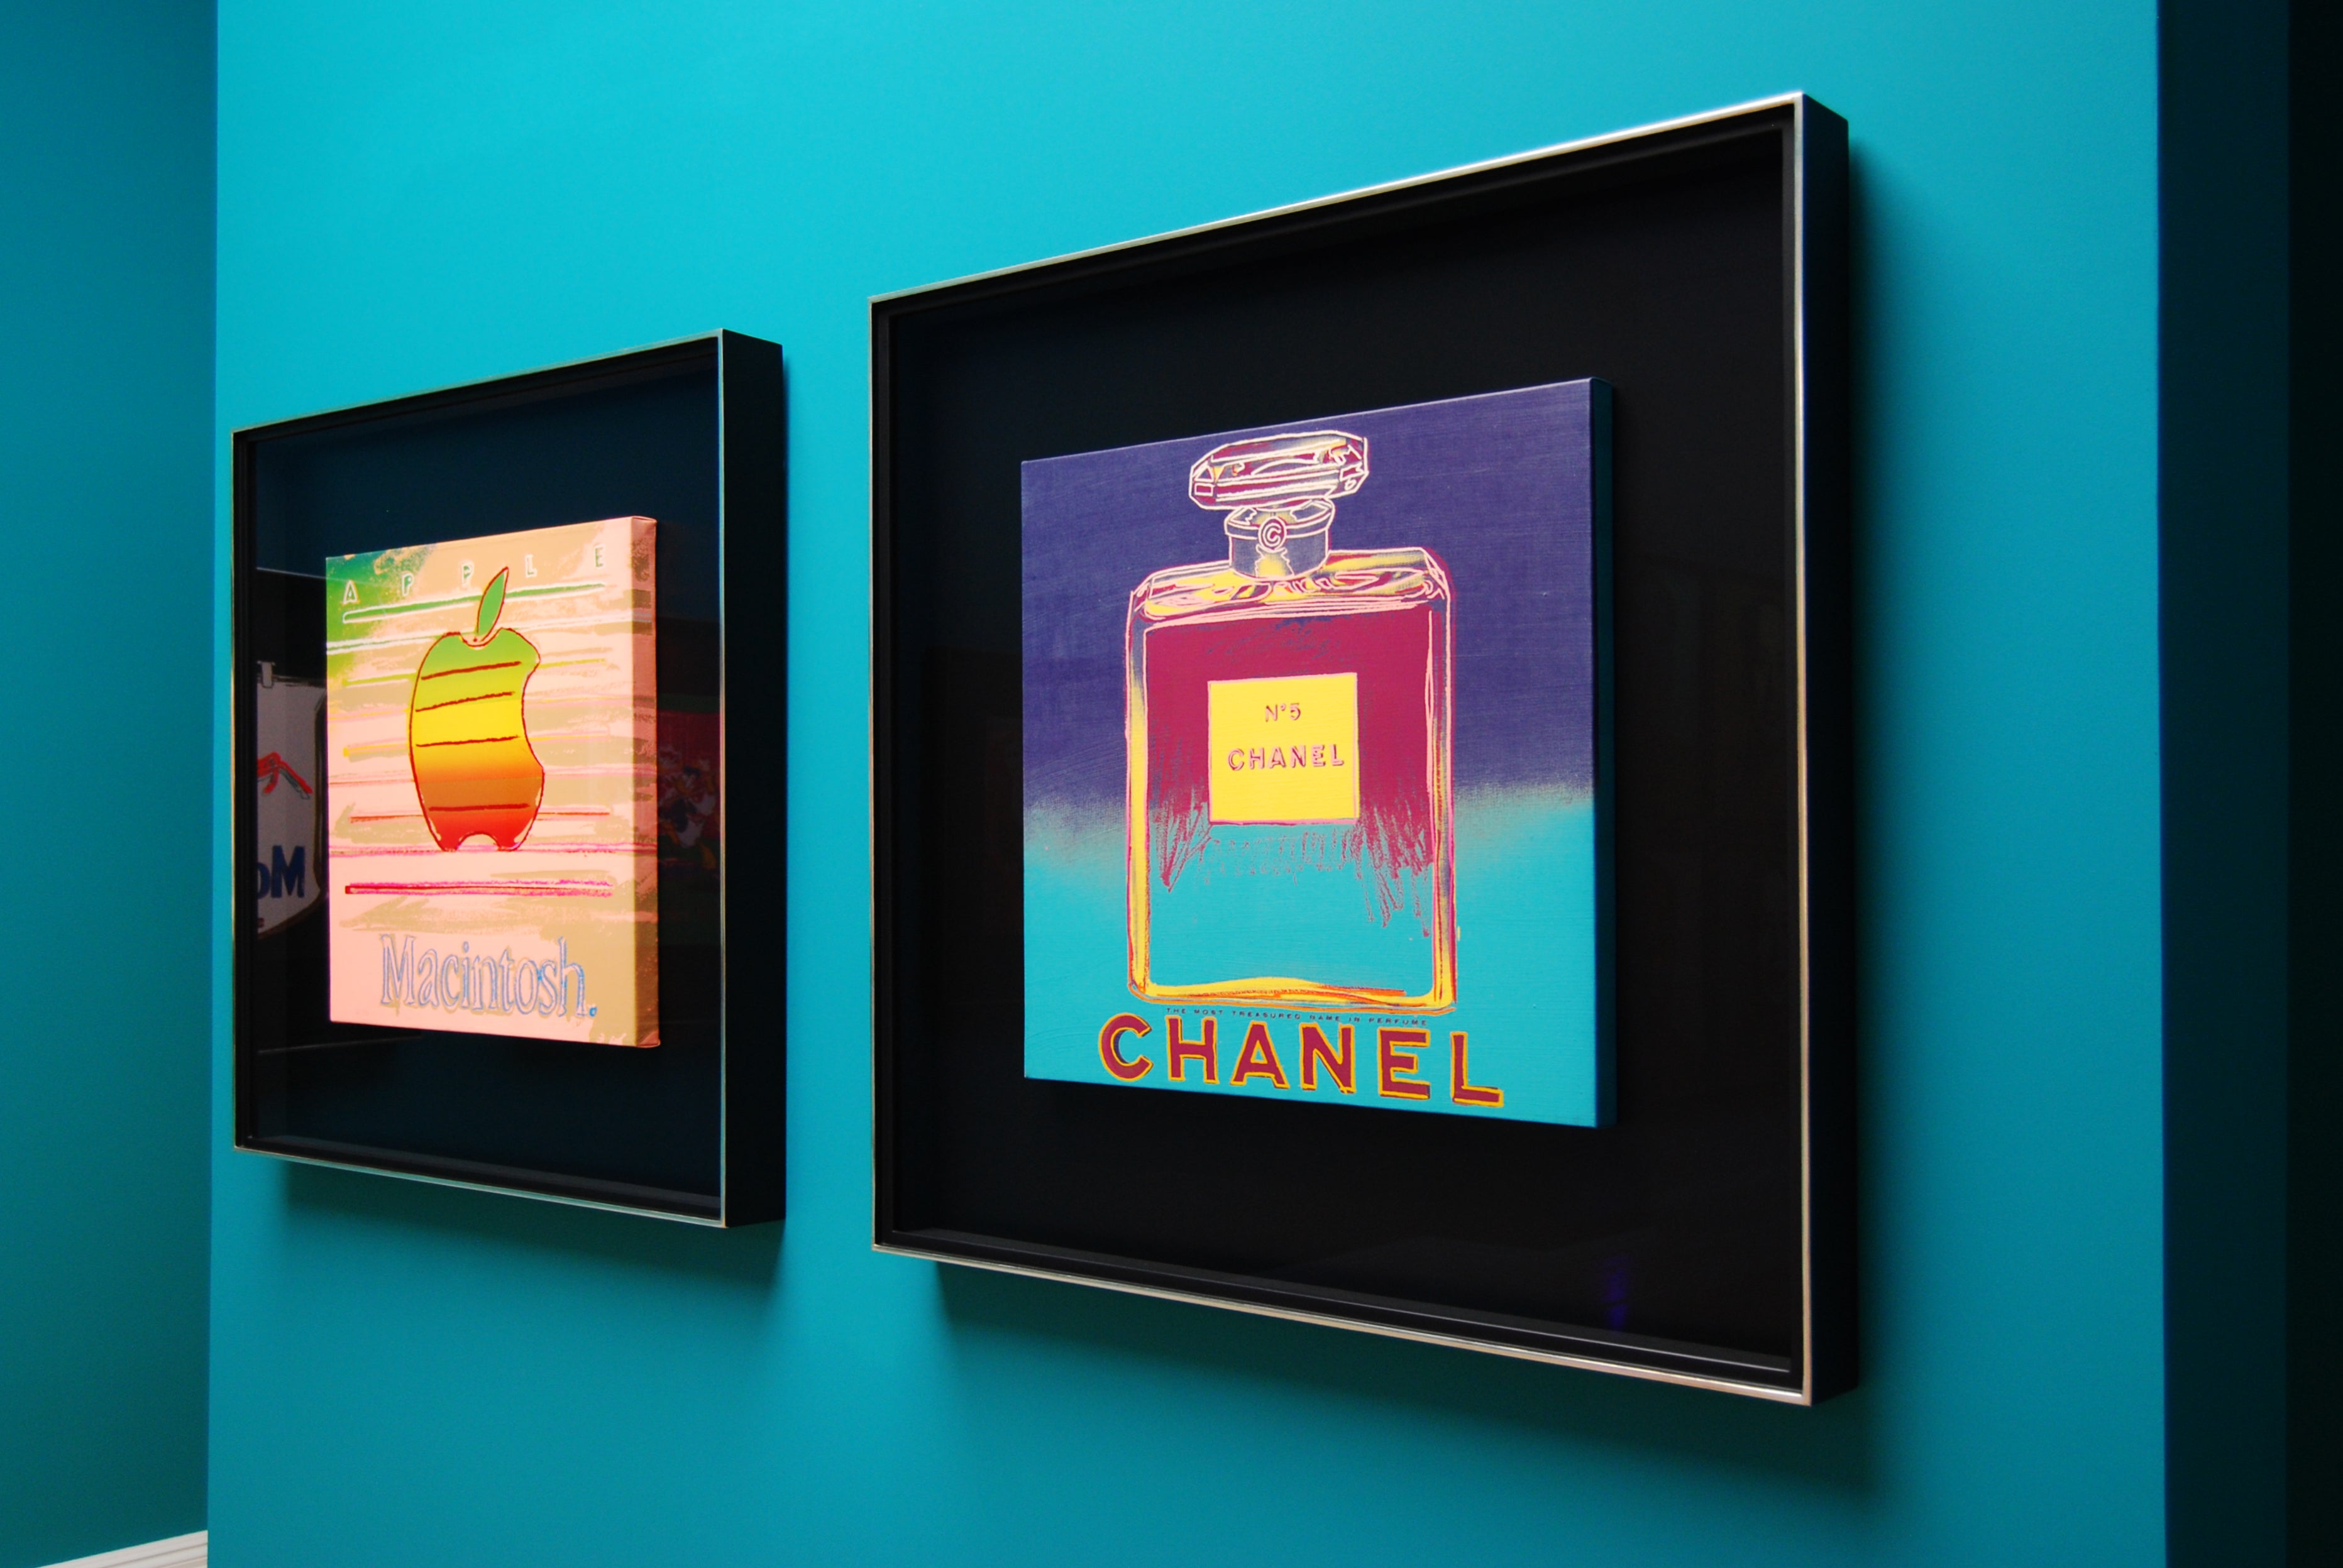 Warhol reimagined famous adverts, including Apple Macintosh and Chanel No 5